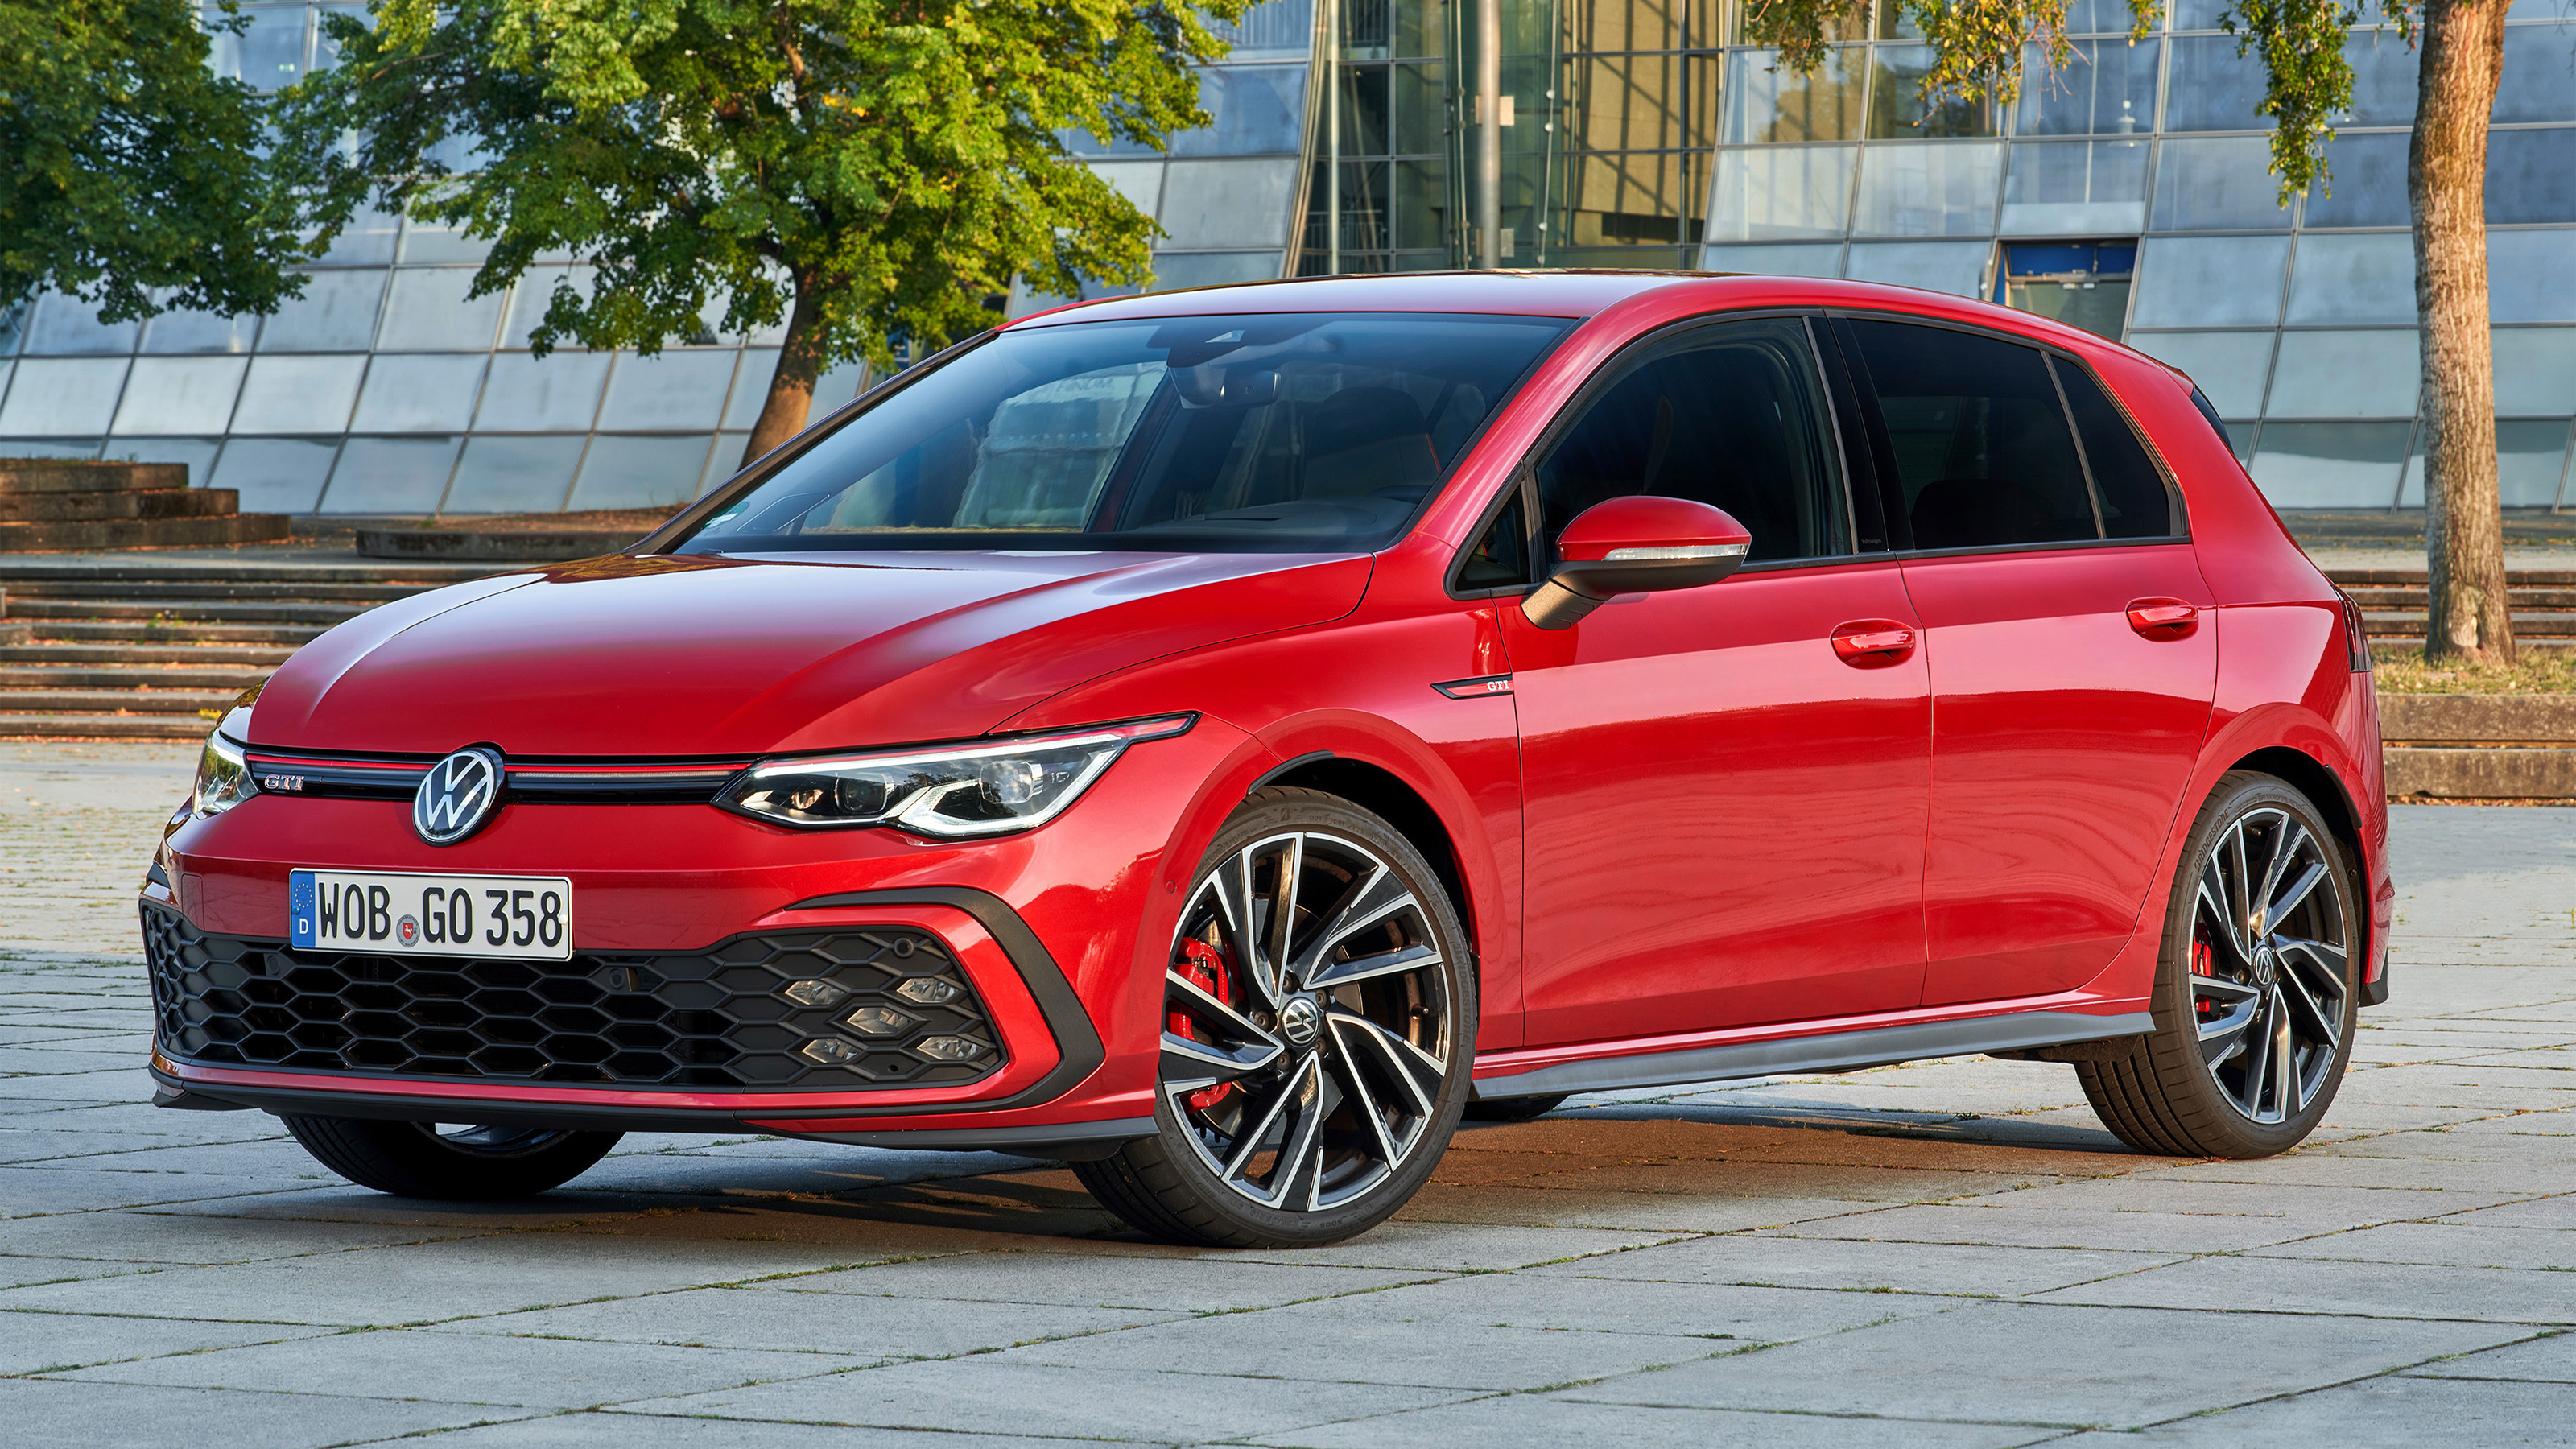 new-2020-volkswagen-golf-gti-priced-from-33-460-auto-express